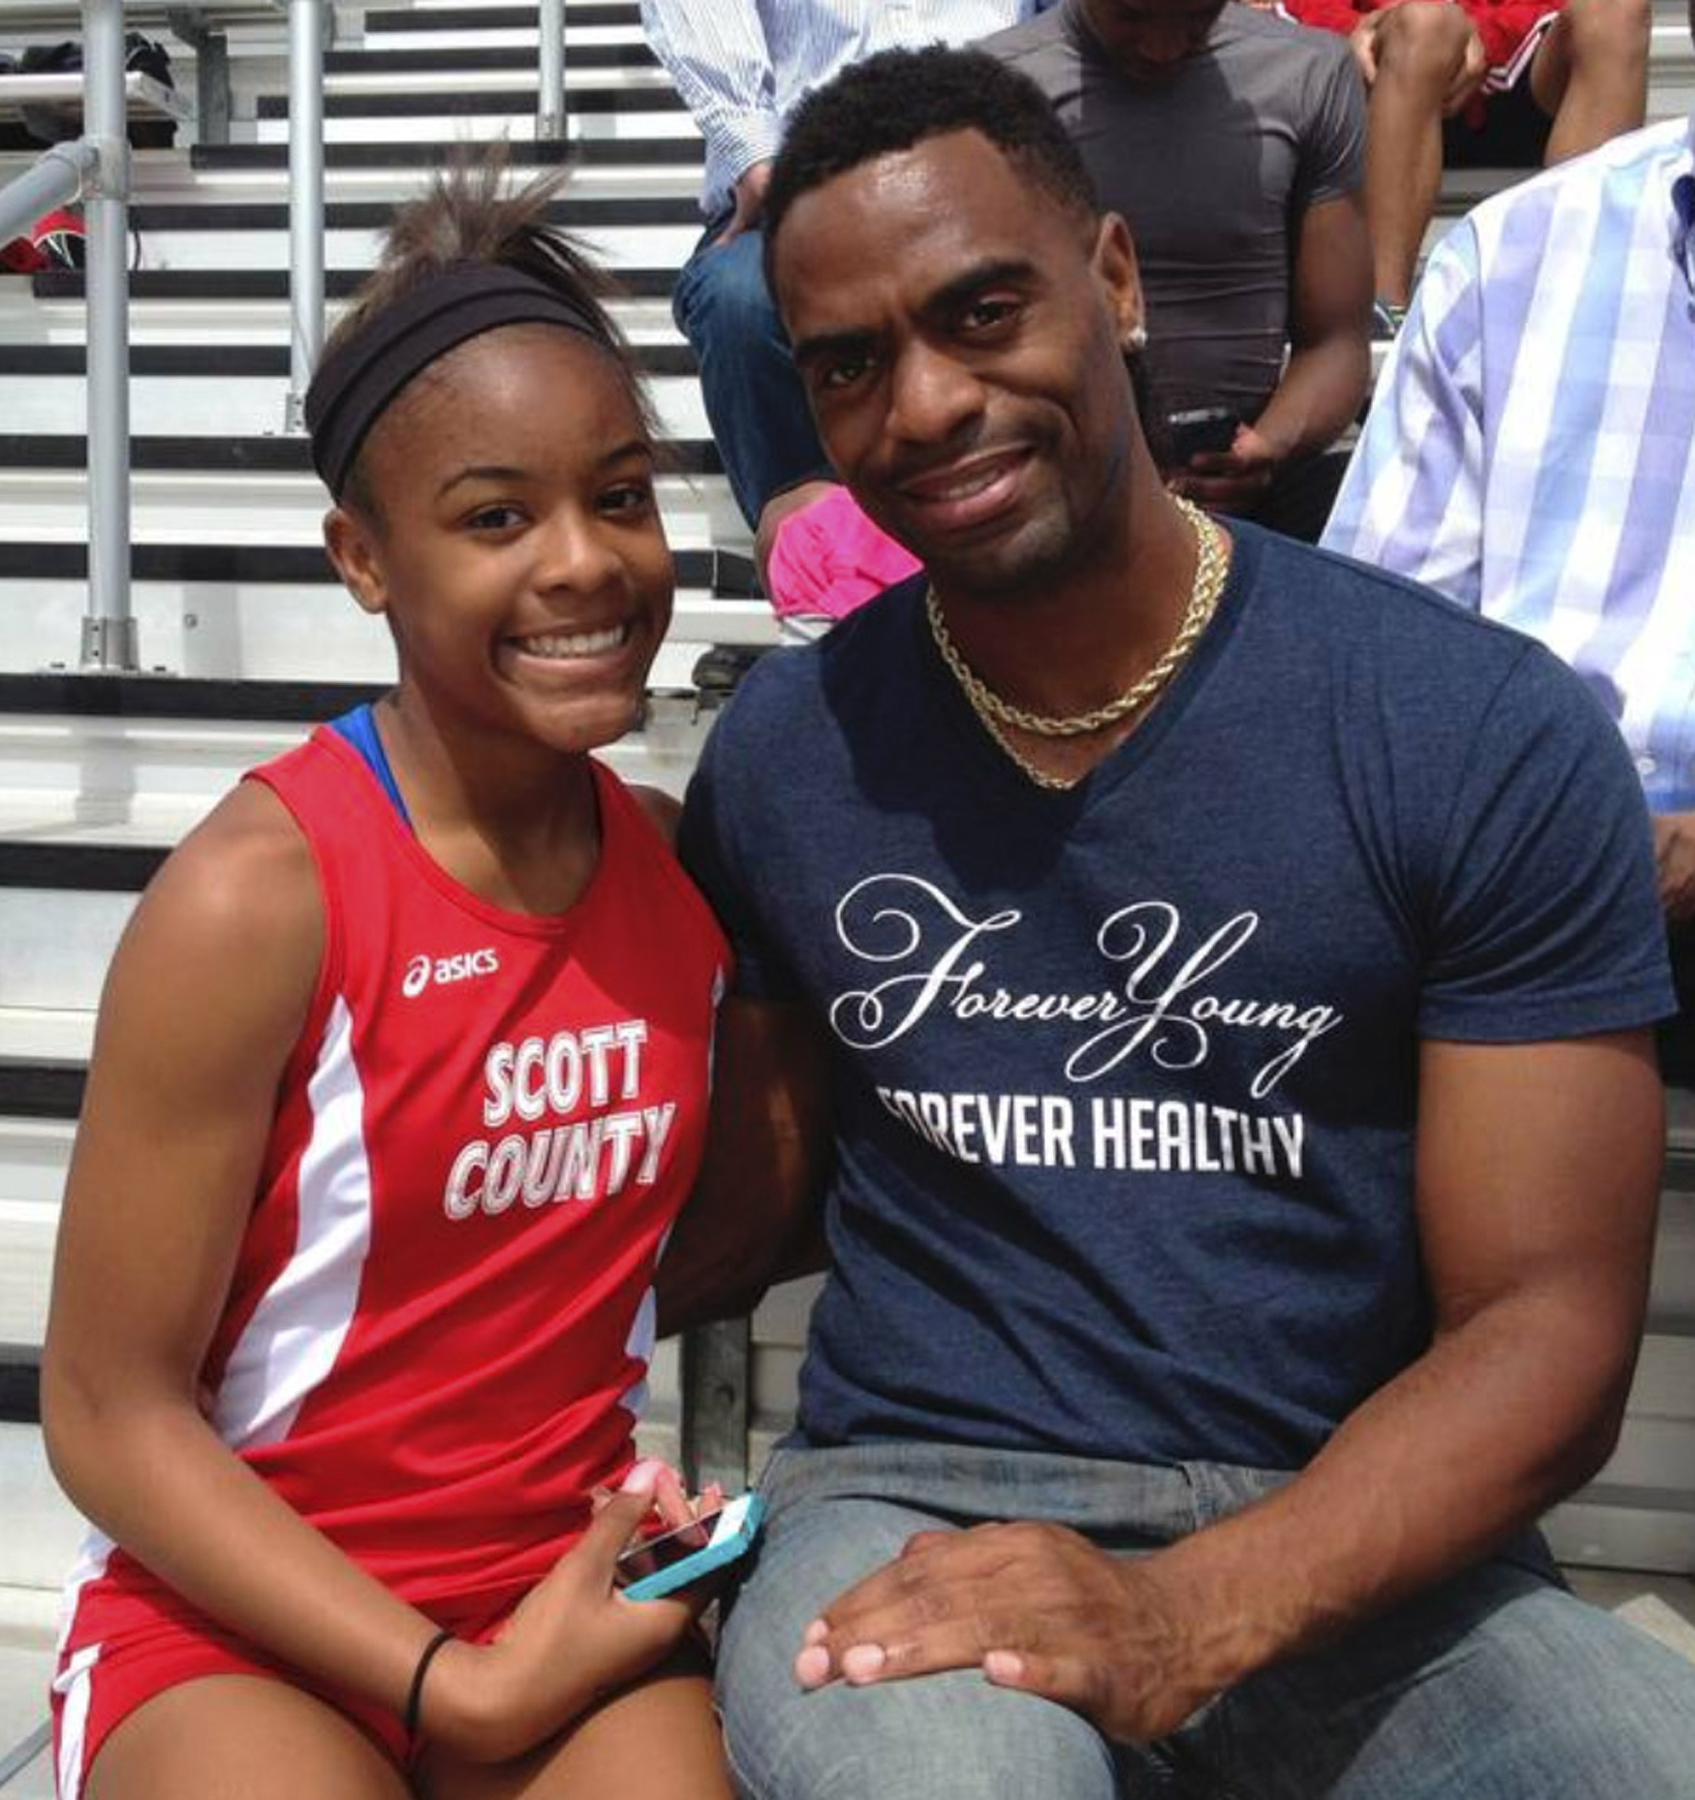 In this May 3, 2014, photo, Trinity Gay, a seventh-grader racing for her Scott County High School team, poses for a photo with her father Tyson Gay, after she won the 100 meters and was part of the winning 4-by-100 and 4-by-200 relays at the meet in Georgetown, Ky. (Mark Maloney/Lexington Herald-Leader—AP)